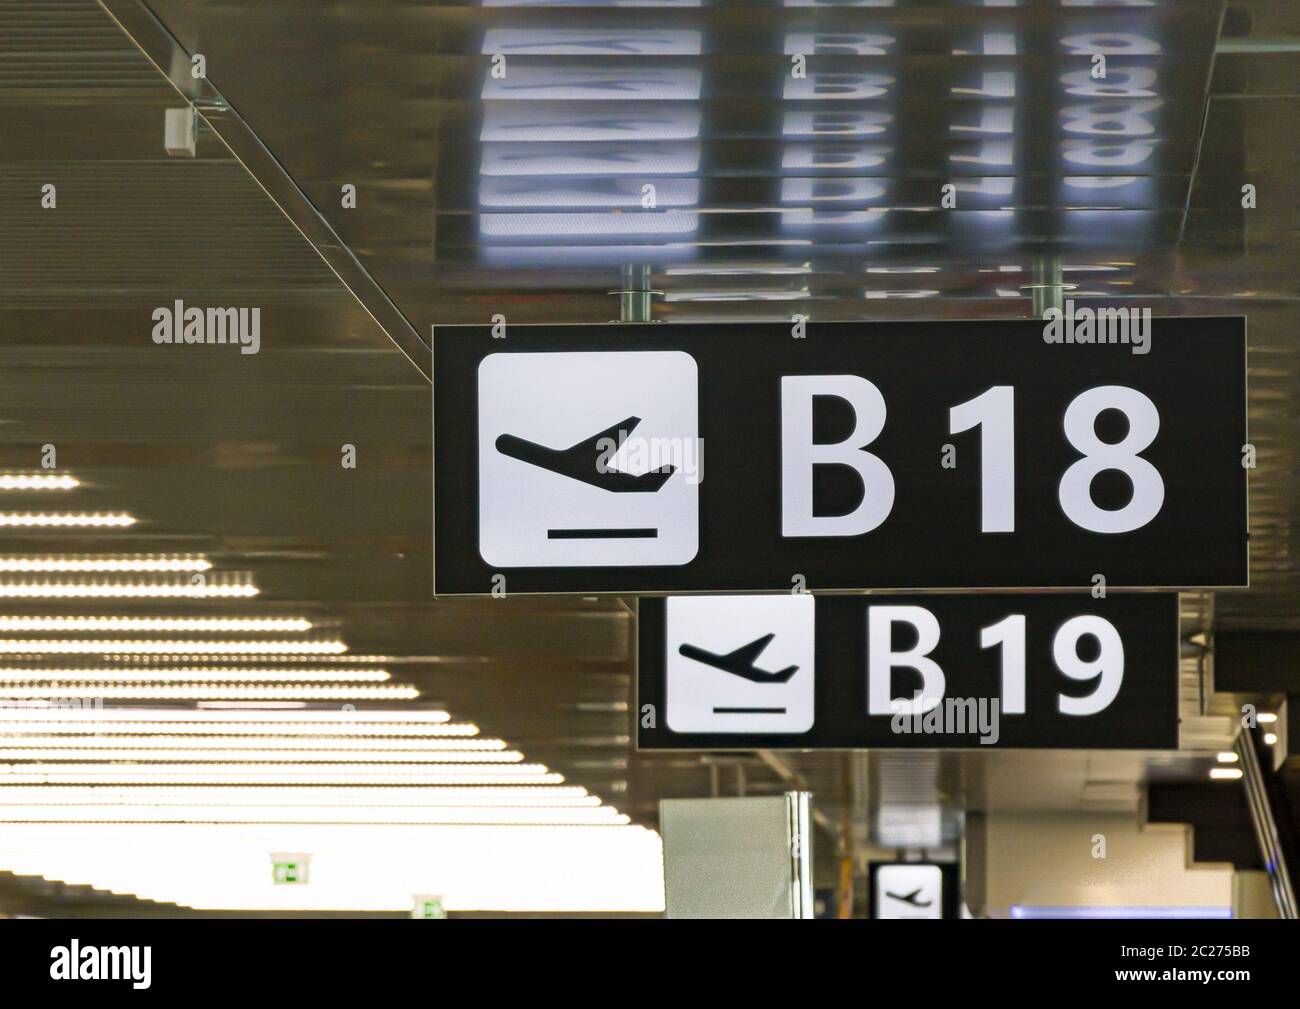 Information panel with the pictogram of an airplane taking off to indicate the boarding gate B 18 in Stock Photo